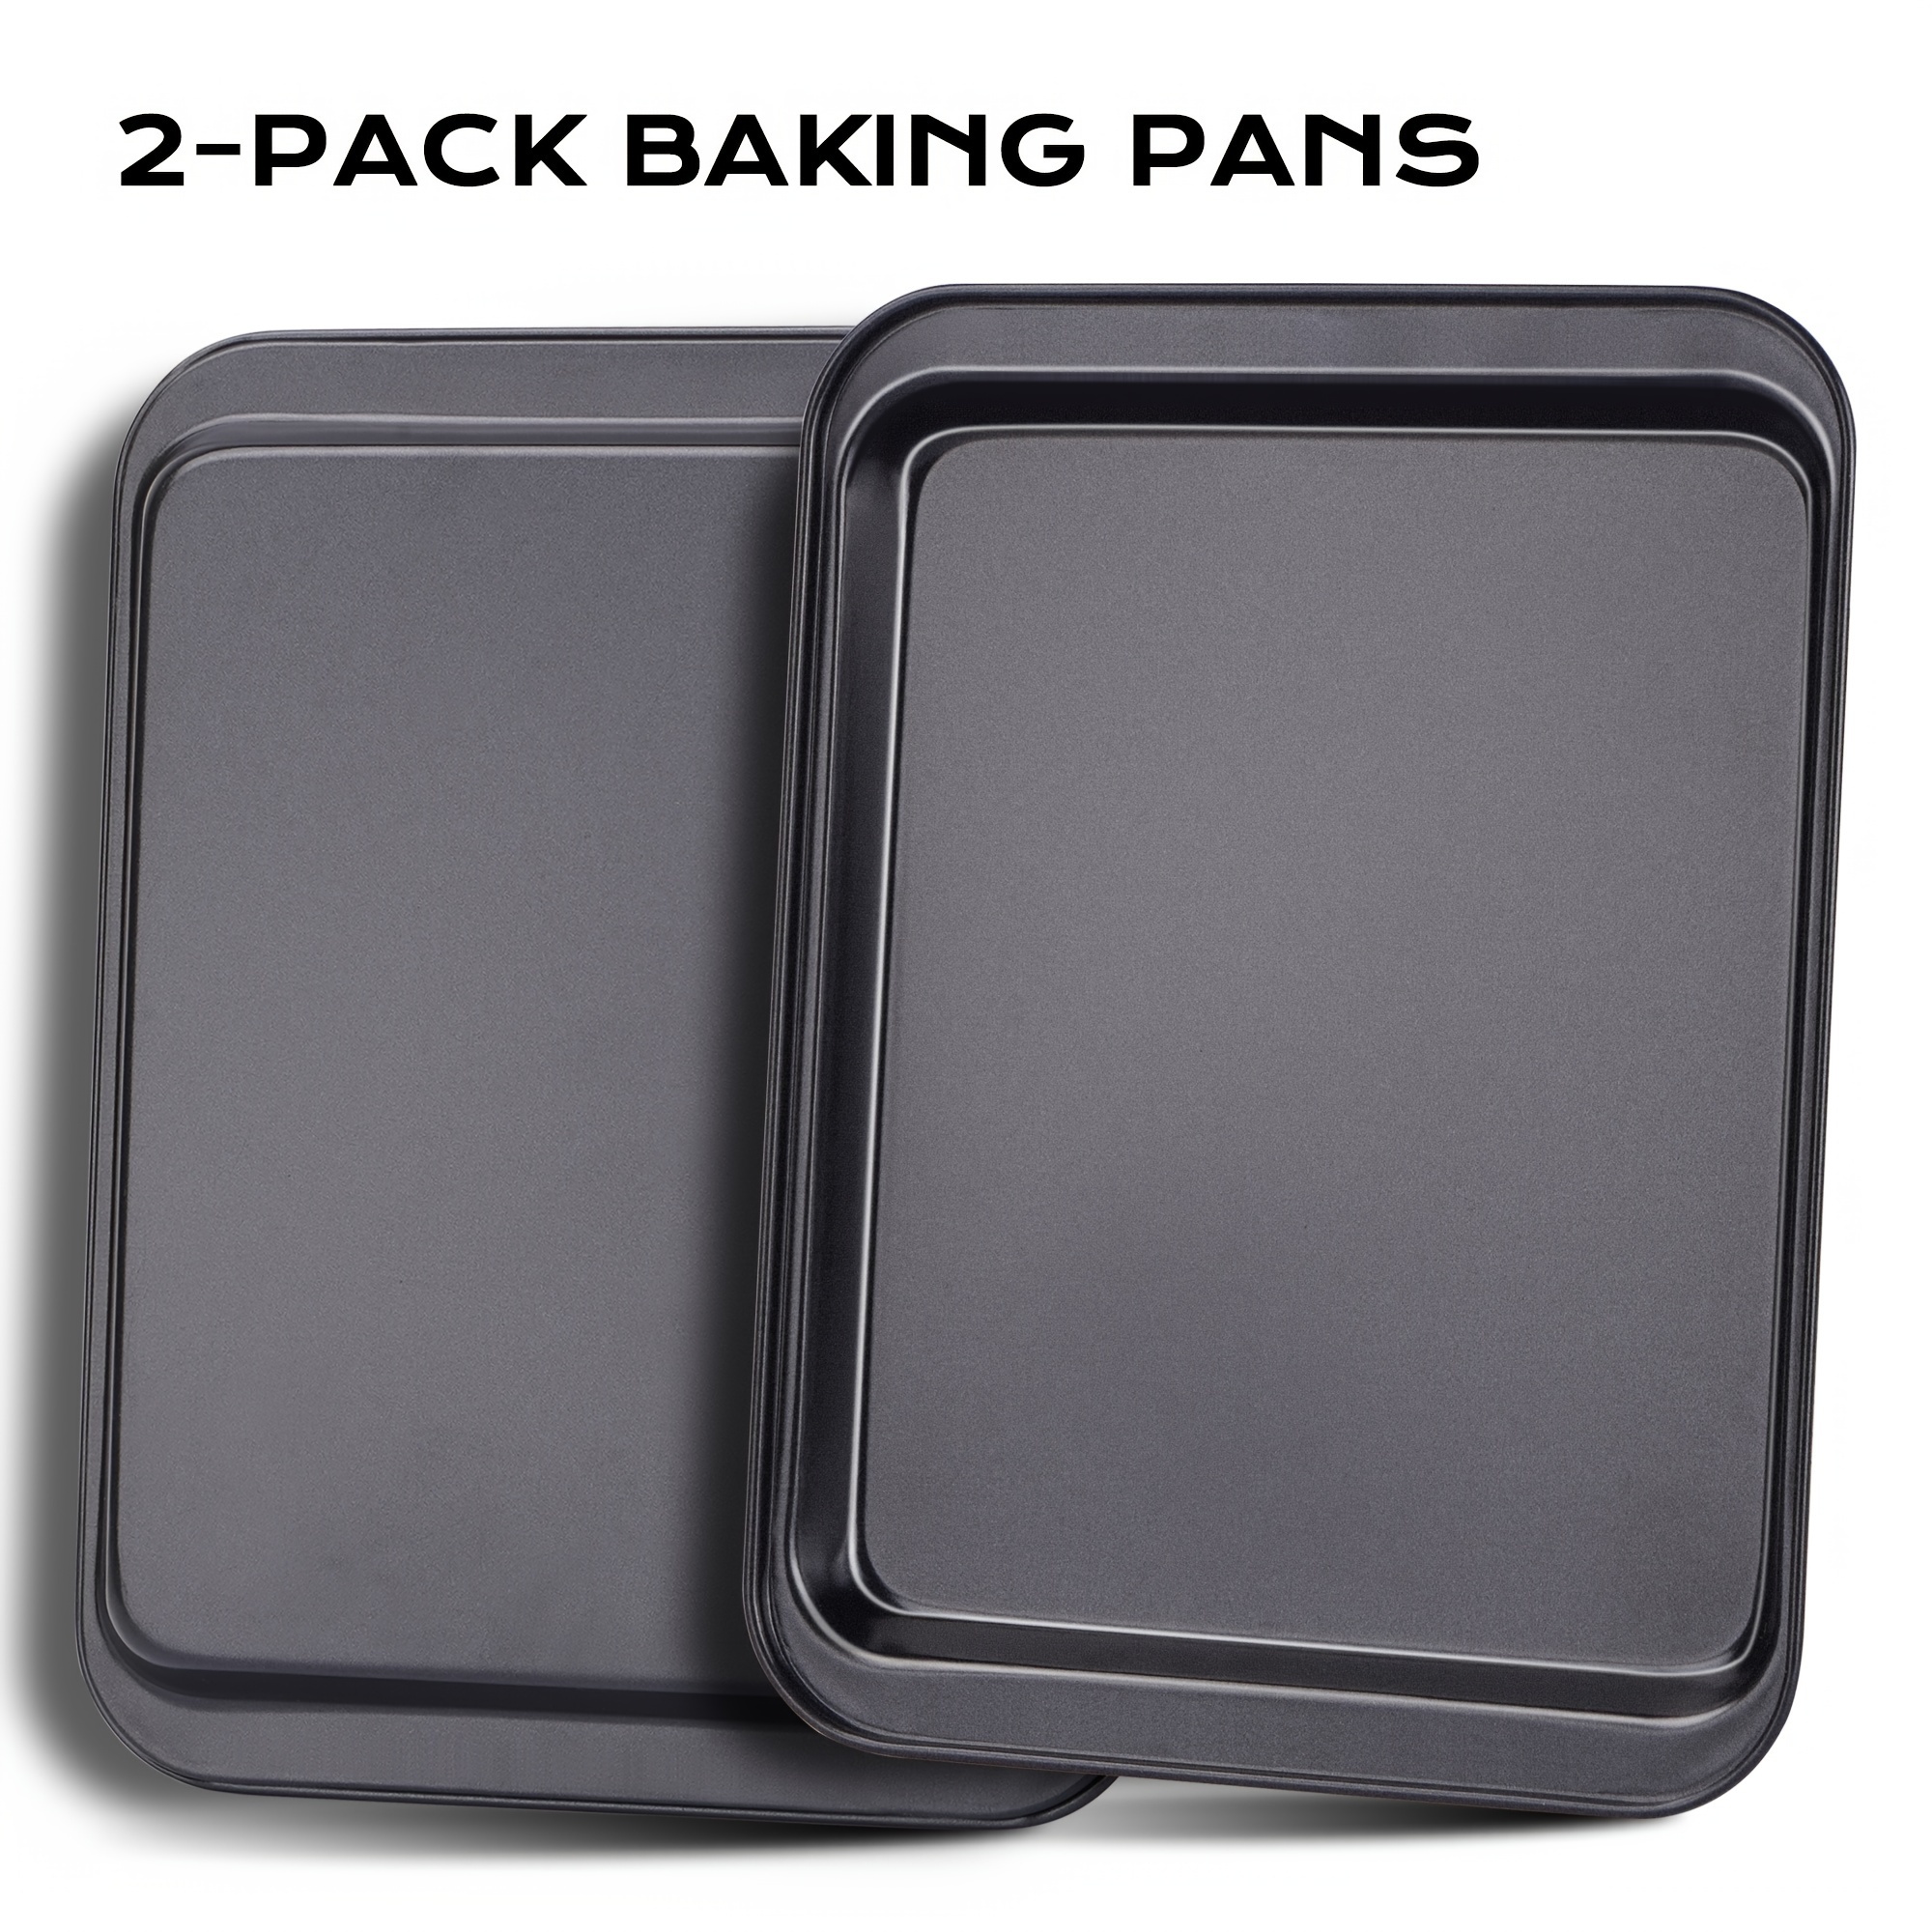 4-Pack Aluminum Jelly Roll Sheet Baking Pan, Steel Nonstick Cookie She